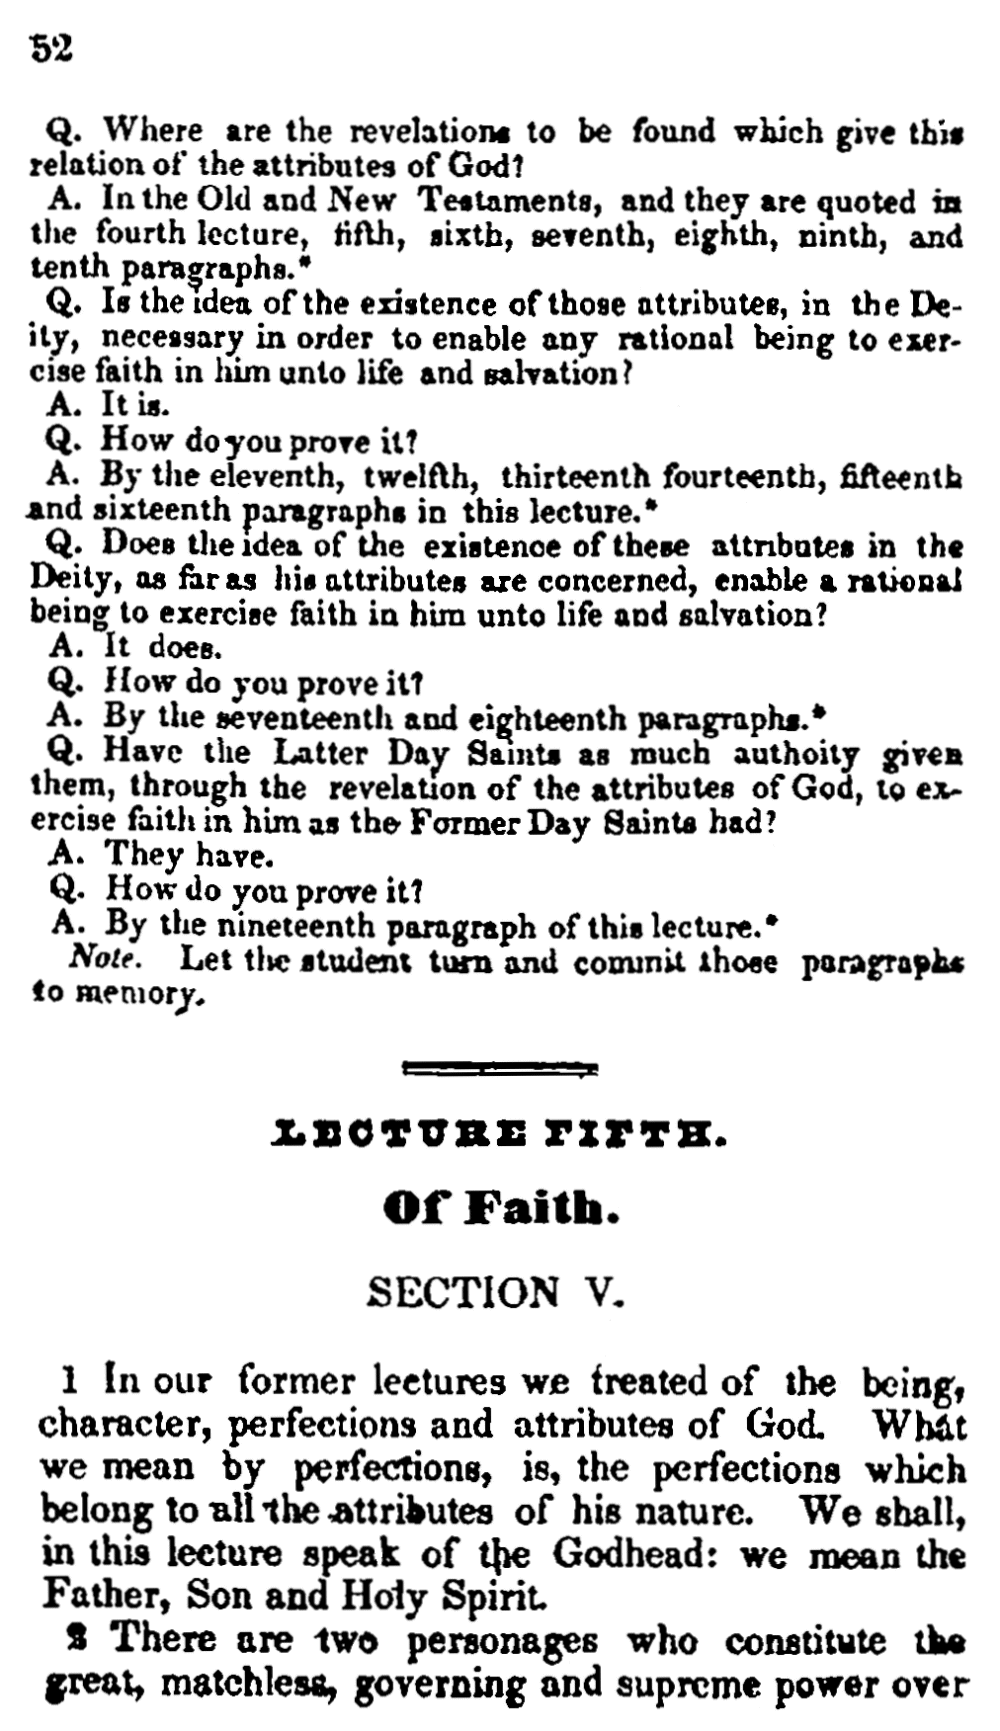 1835 Doctrine & Covenants - Lectures on Faith, p. 52